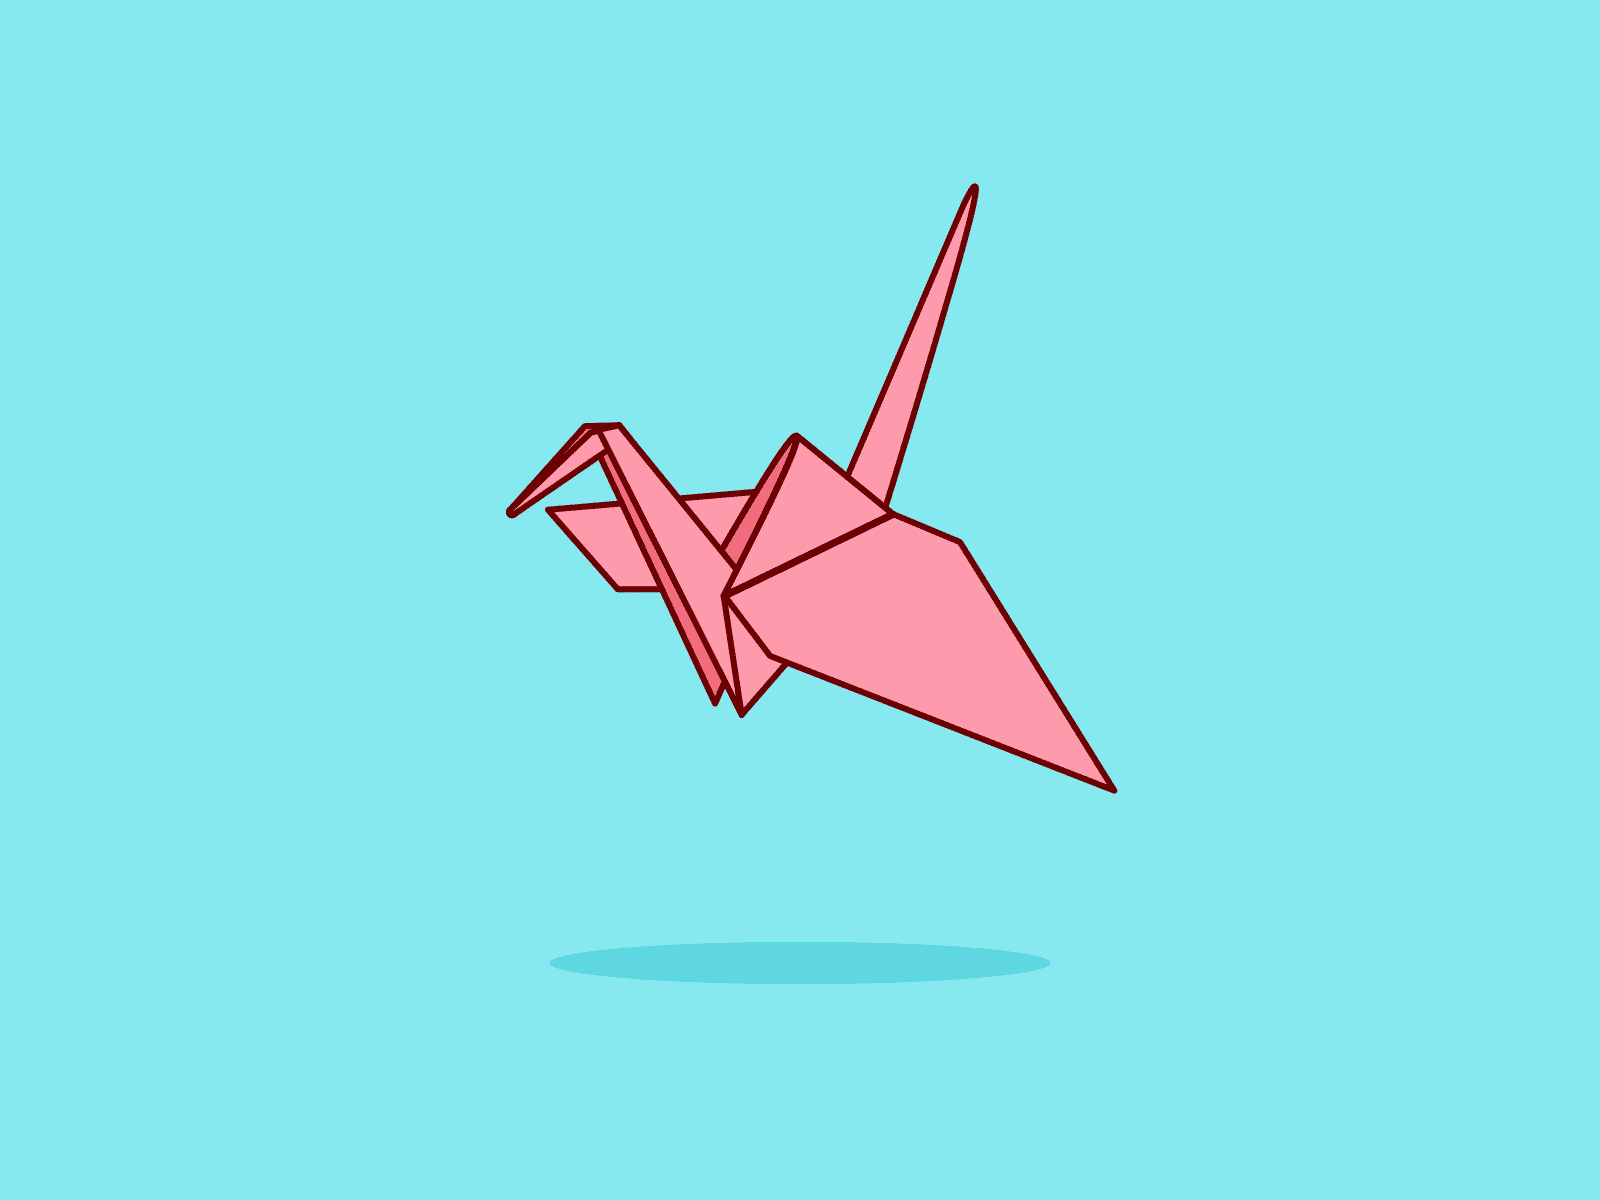 Origami Bird after effects animated bird blue bright cartoon crane design flapping folded illustration origami paper pastel pink